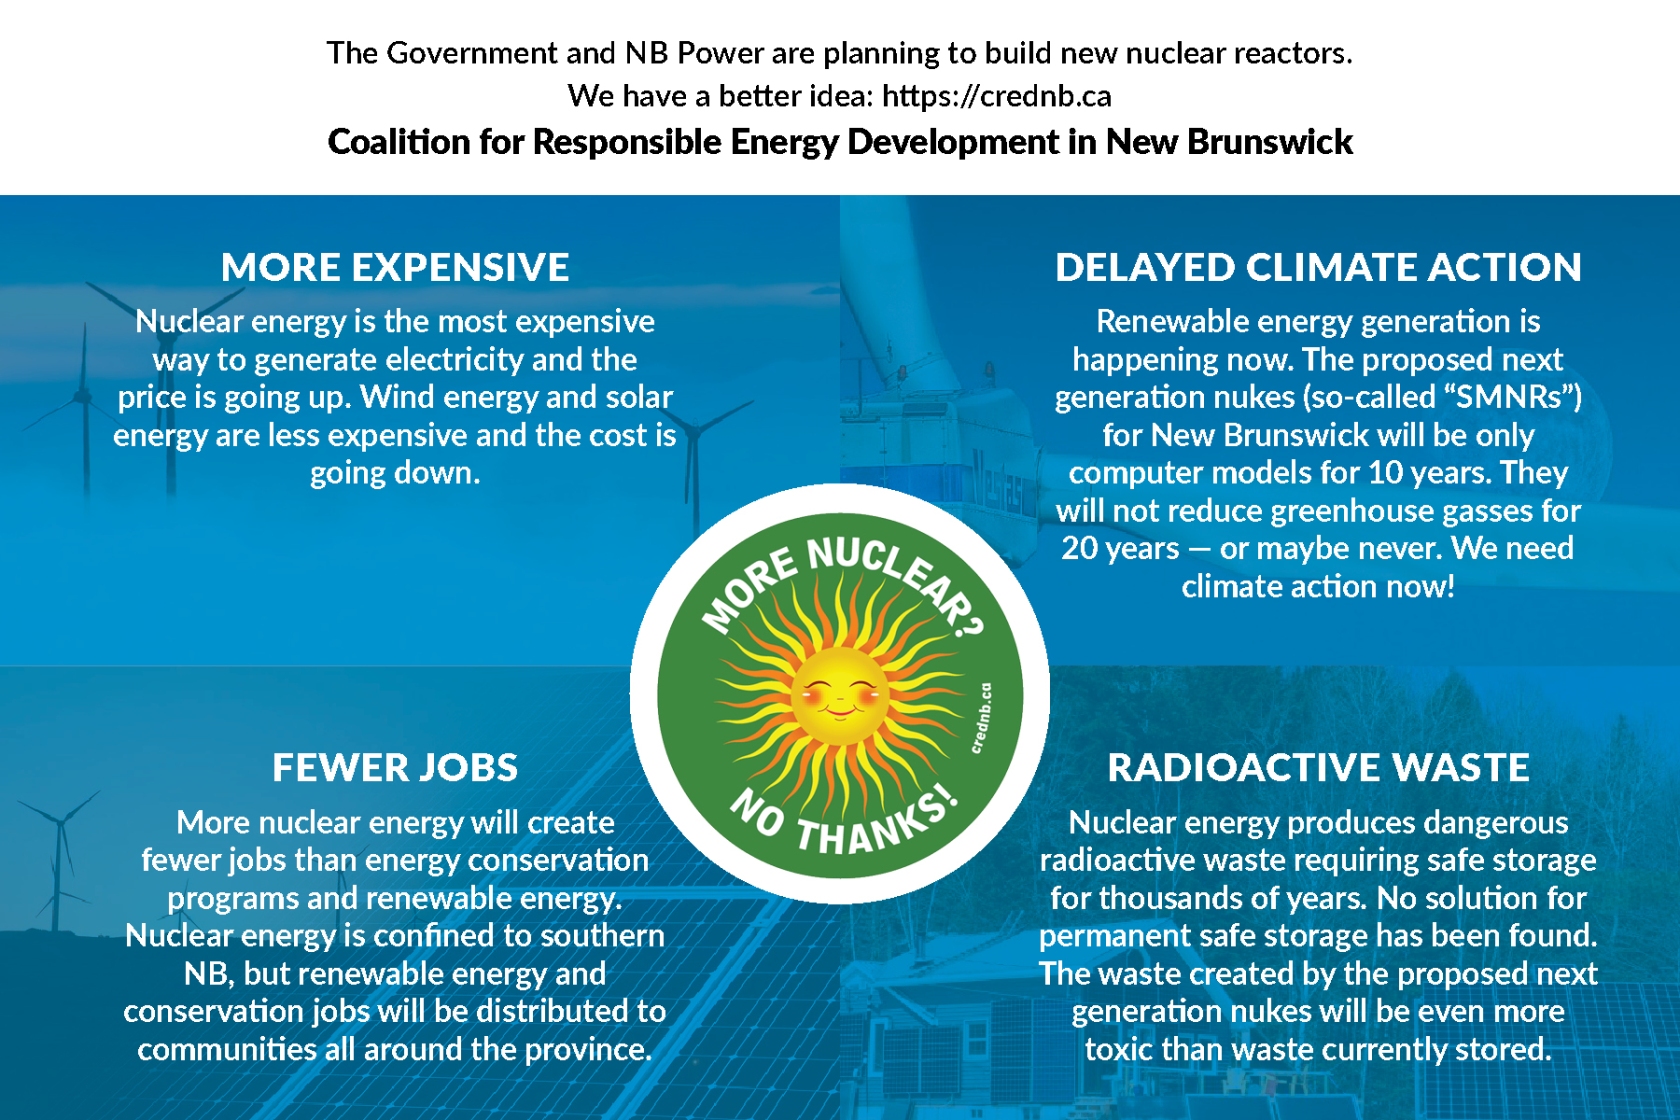 two-new-nuclear-reactors-for-nb-with-no-adequate-policy-on-radioactive